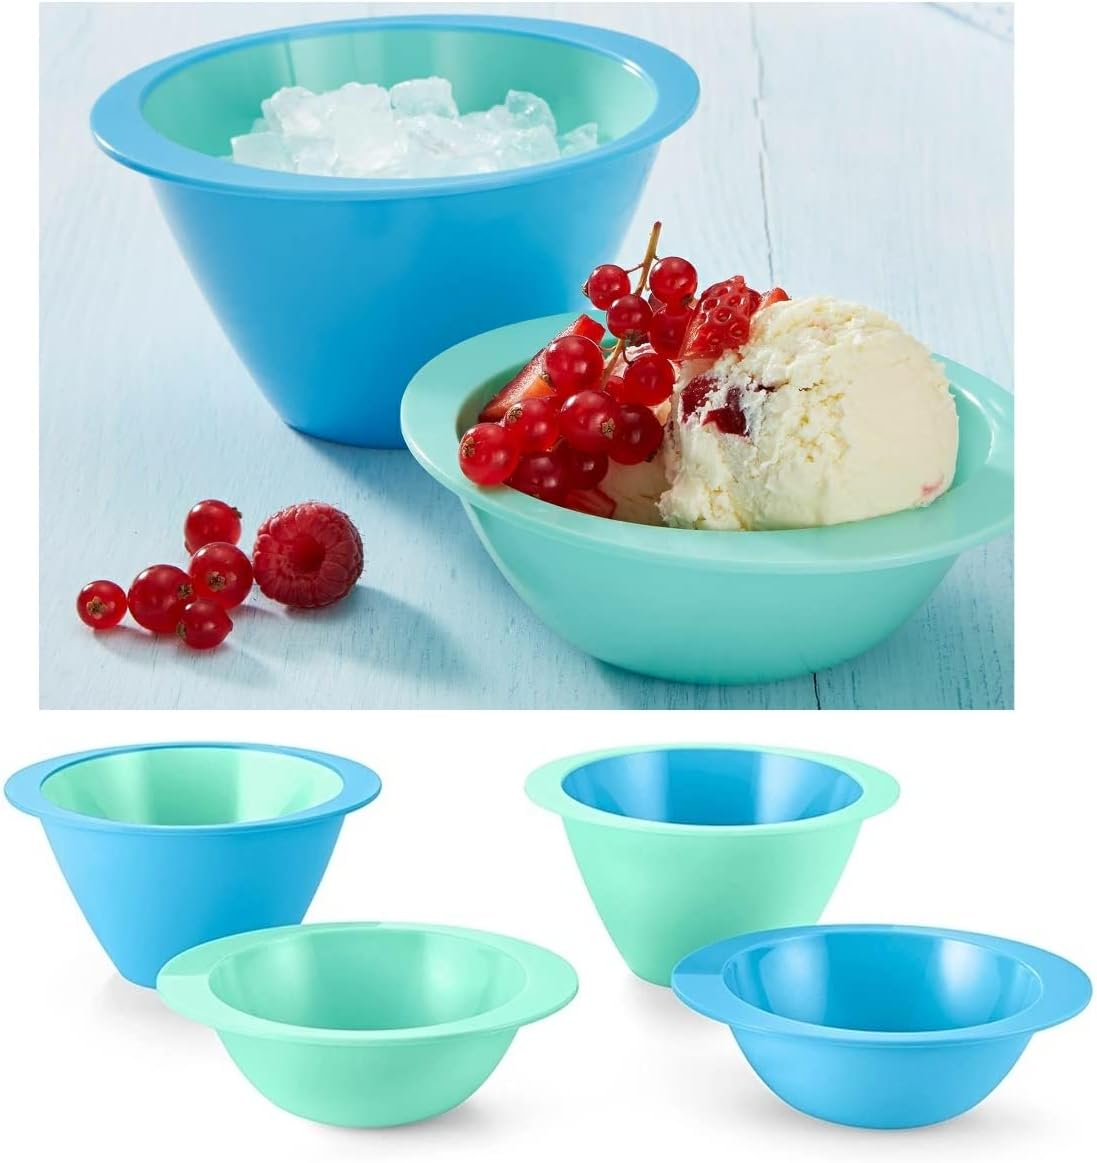 TCM TCHIBO 2 x Cold Ice Cream Bowls with Cooling Function